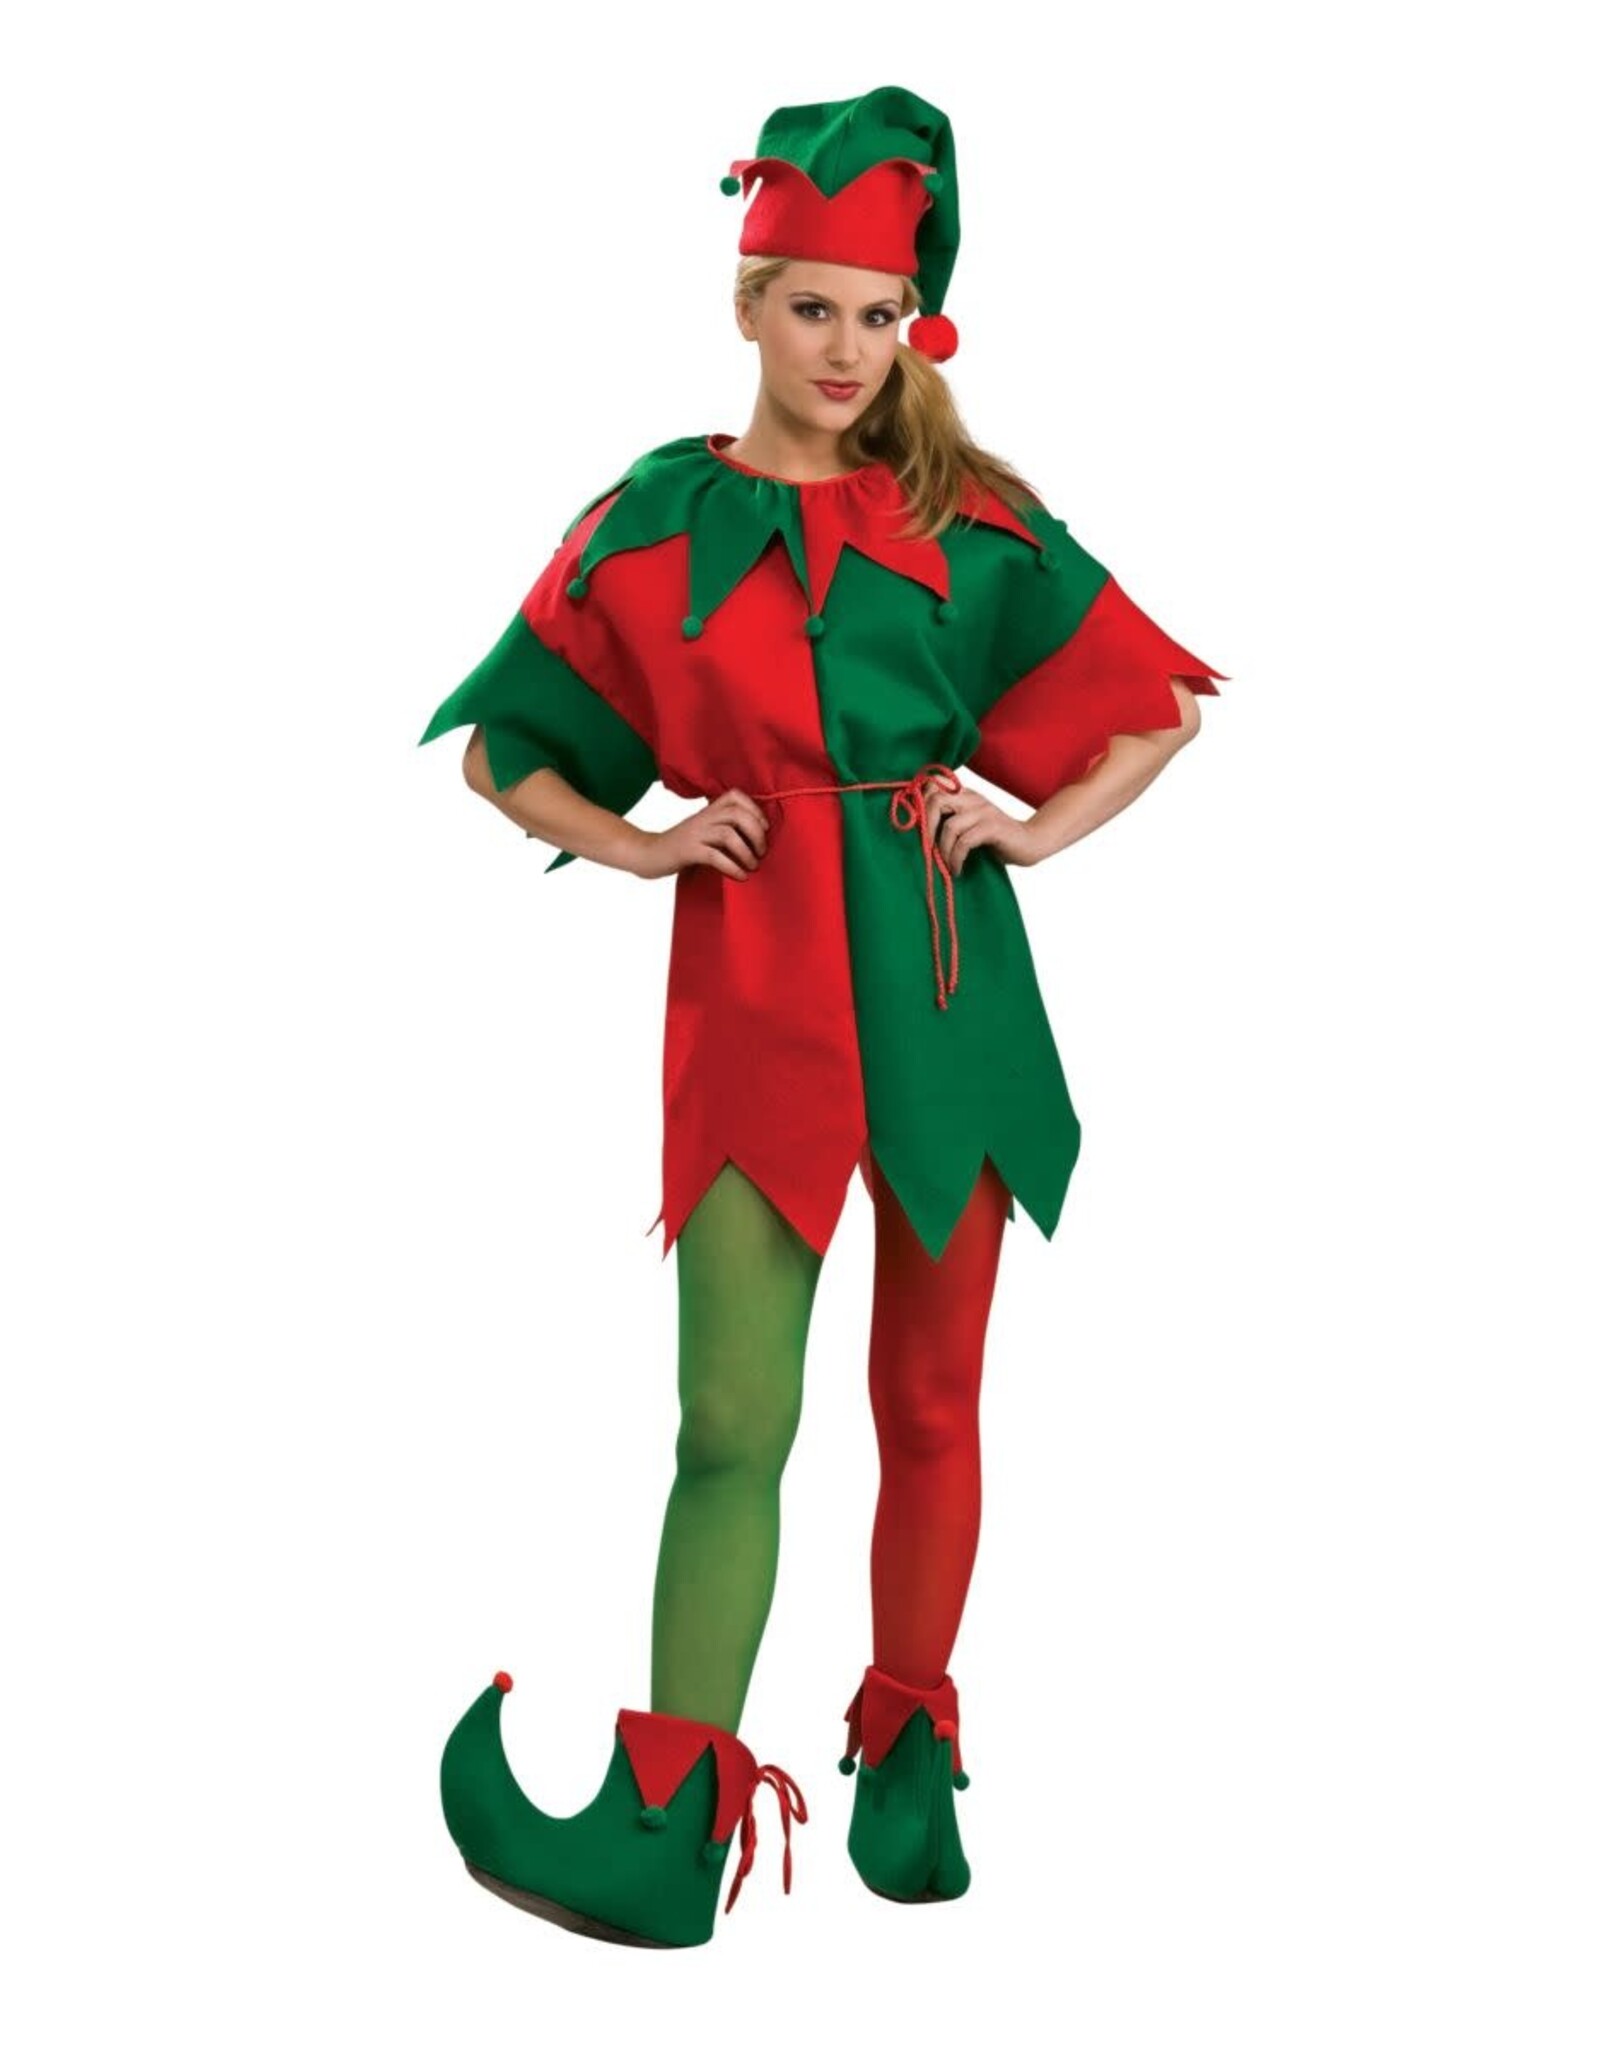 Rubies Costume *Discontinued* Elf Tights